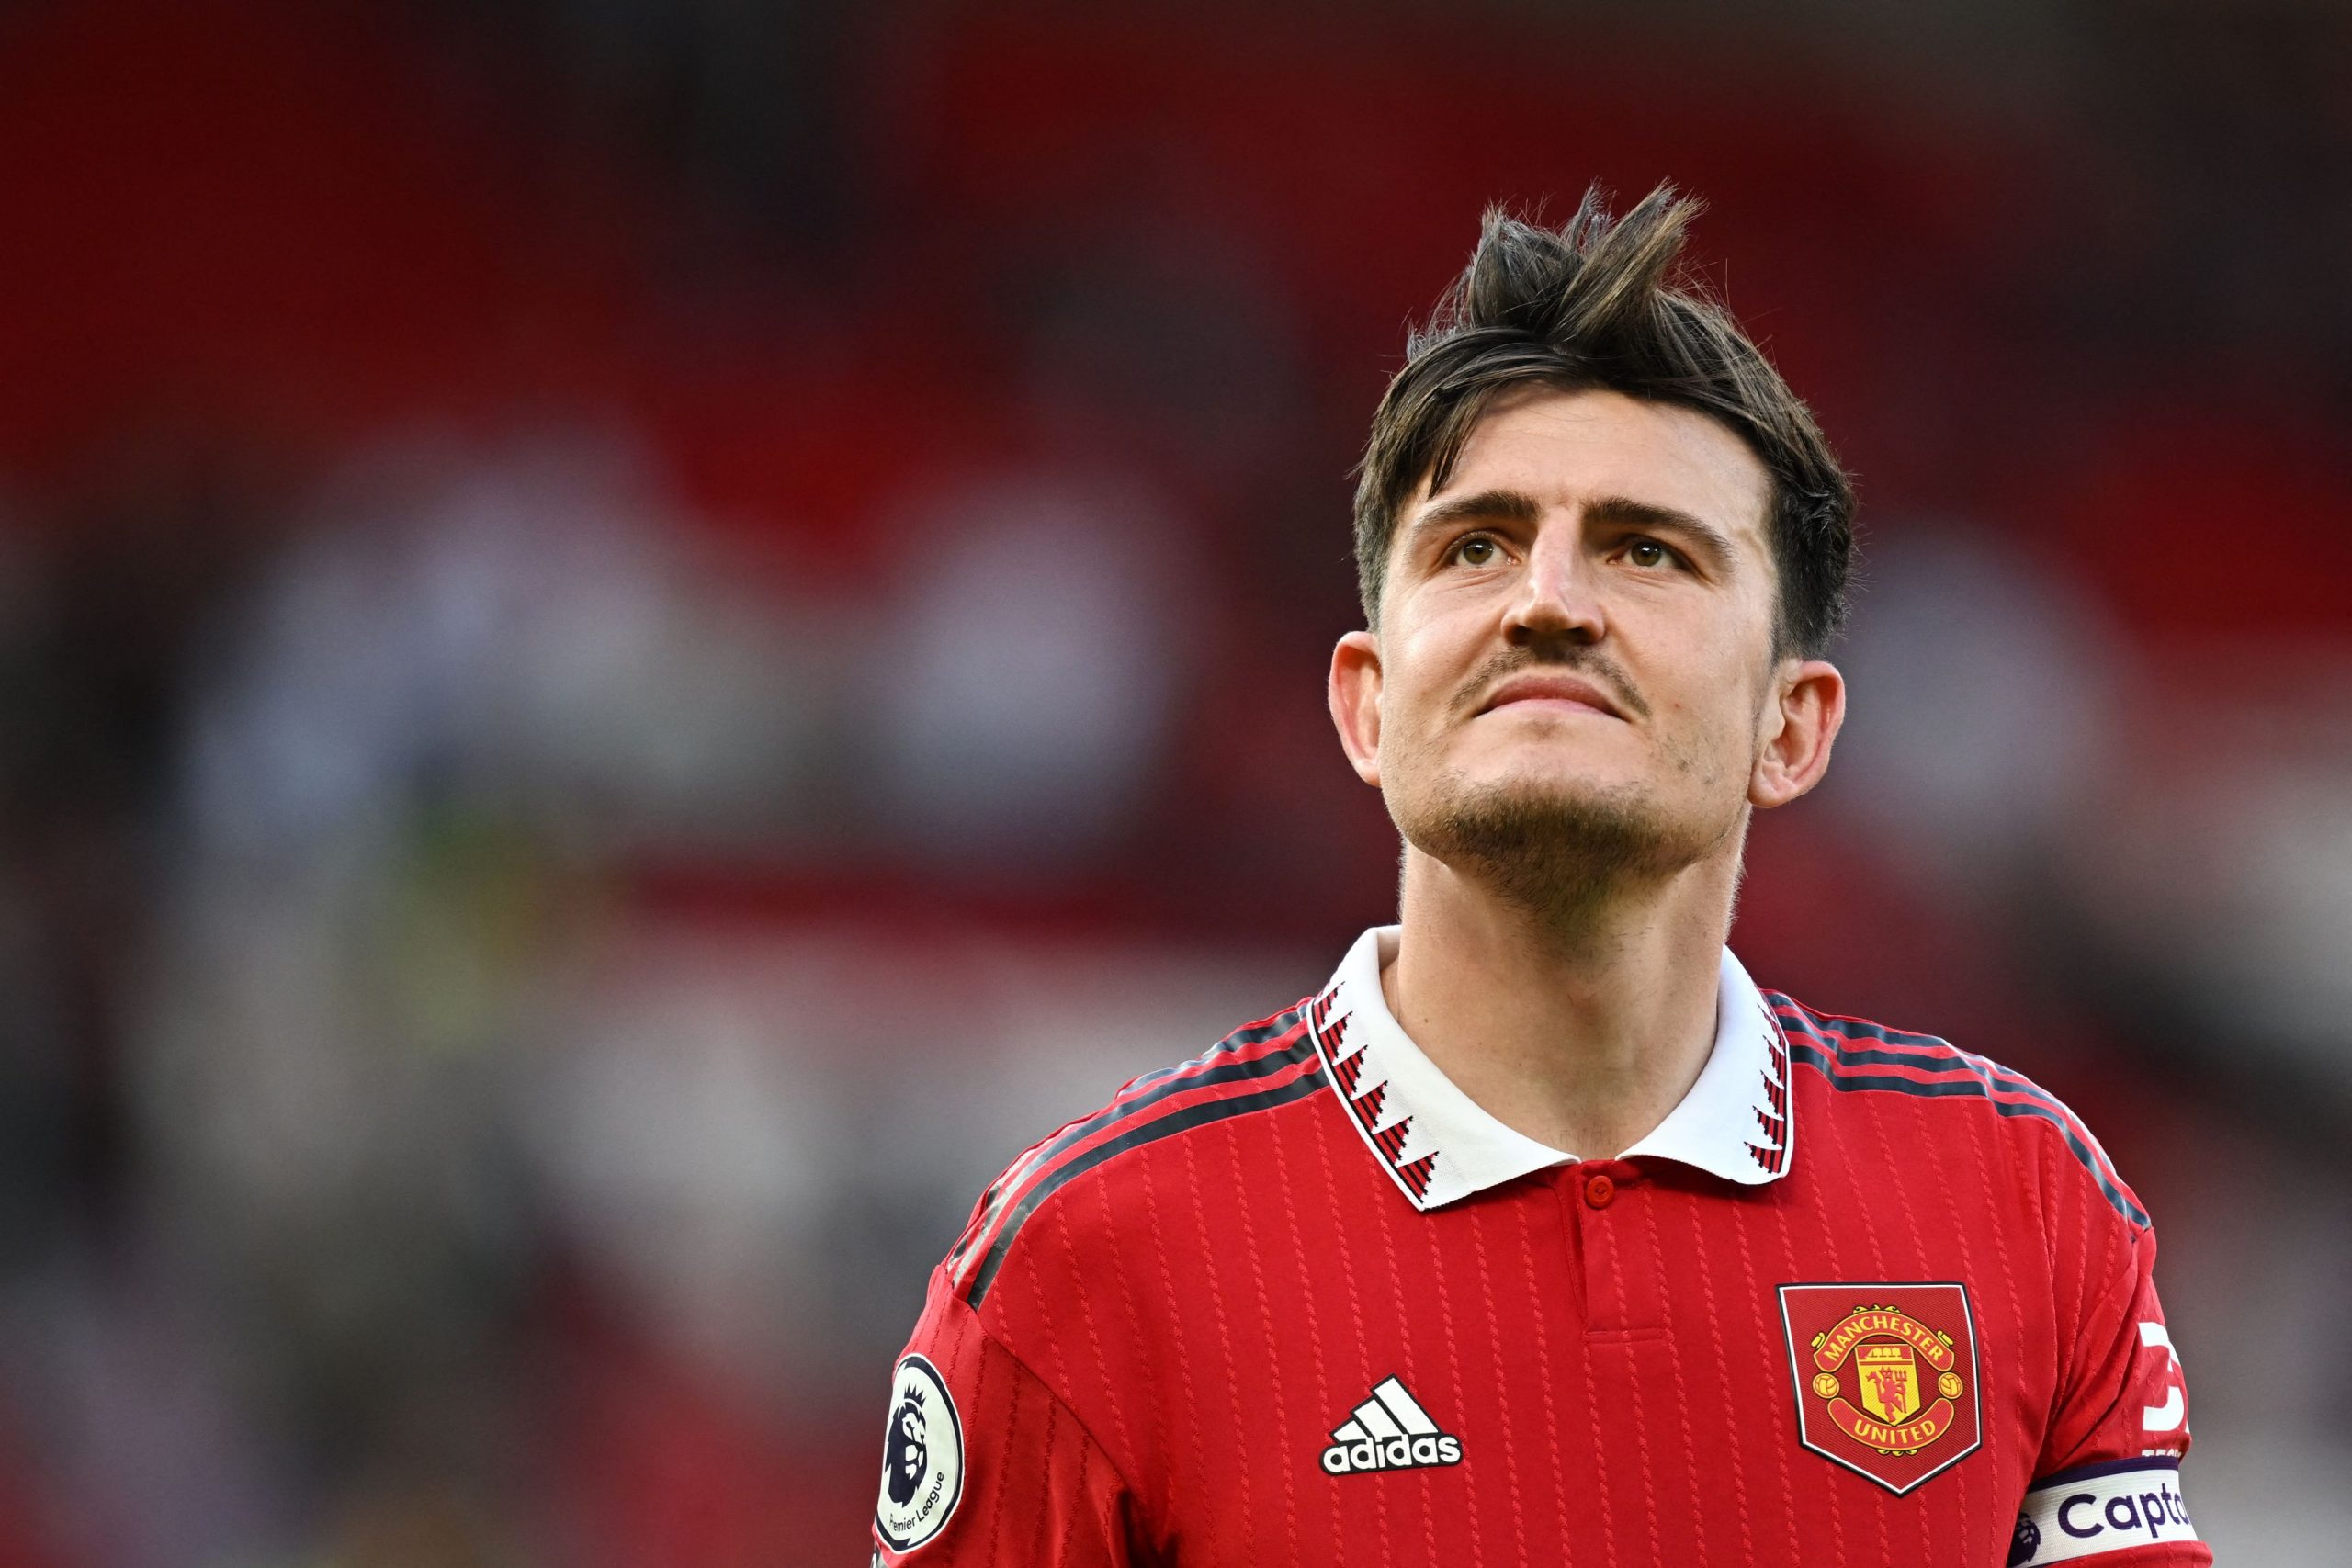 Tottenham could explore a move for Manchester United outcast Harry Maguire in January.